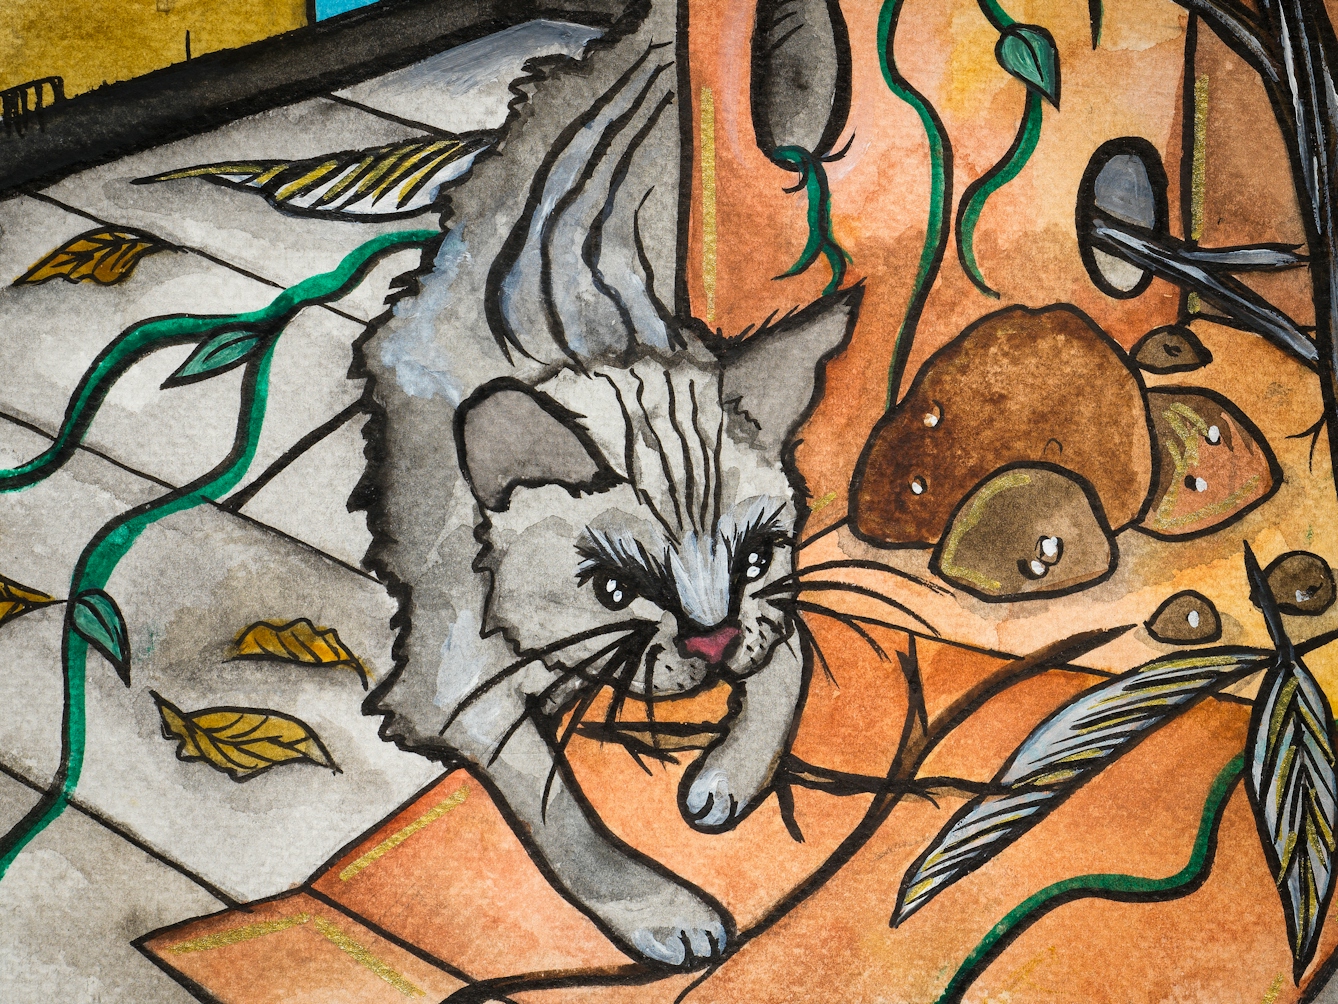 Detail from a larger colourful artwork. The artwork shows a flatpack box which is open on the front facing side, with several holes in it, on a tiled foor.  There are tree branches and vines growing up through the box and leaves covering the floor. A grey cat is curled around the box.